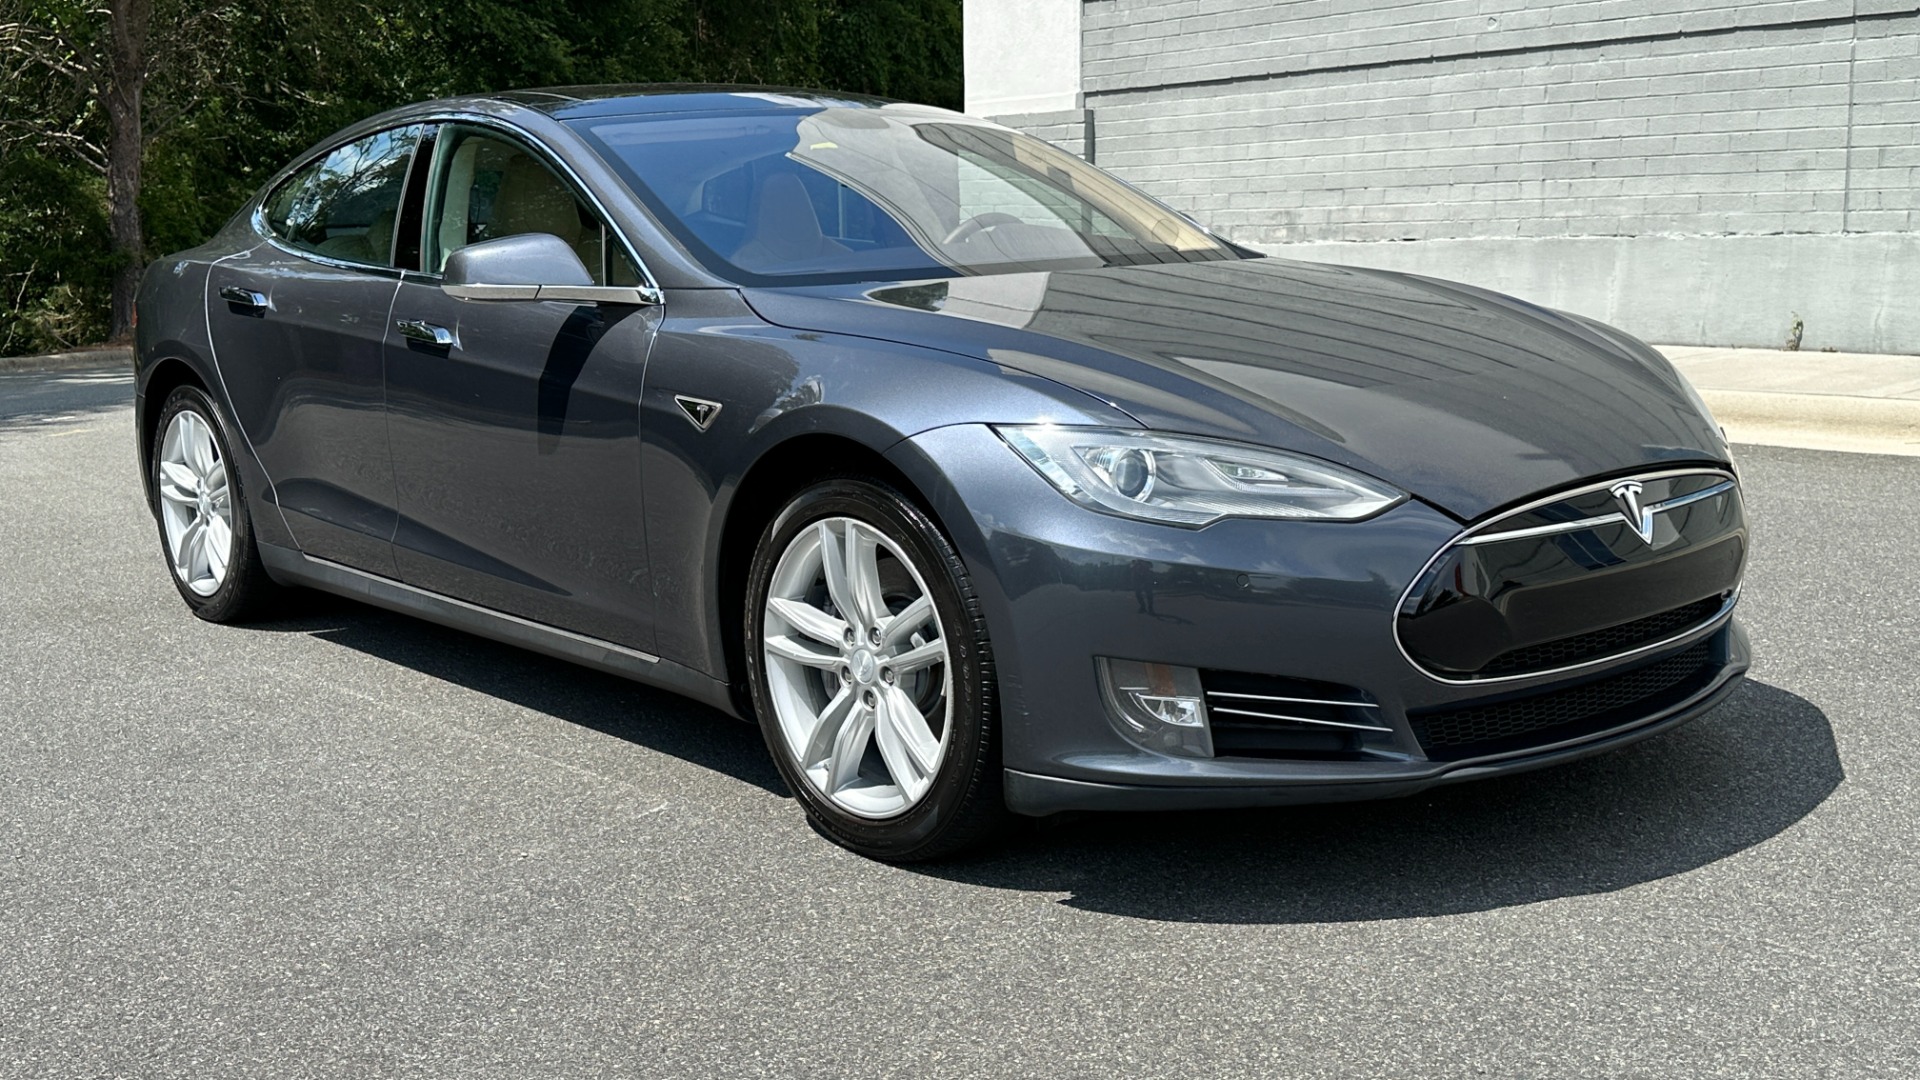 Used 2014 Tesla Model S 60 kWh Battery / 60D / PREMIUM CONNECTIVITY / LEATHER / SUNROOF for sale $19,995 at Formula Imports in Charlotte NC 28227 7